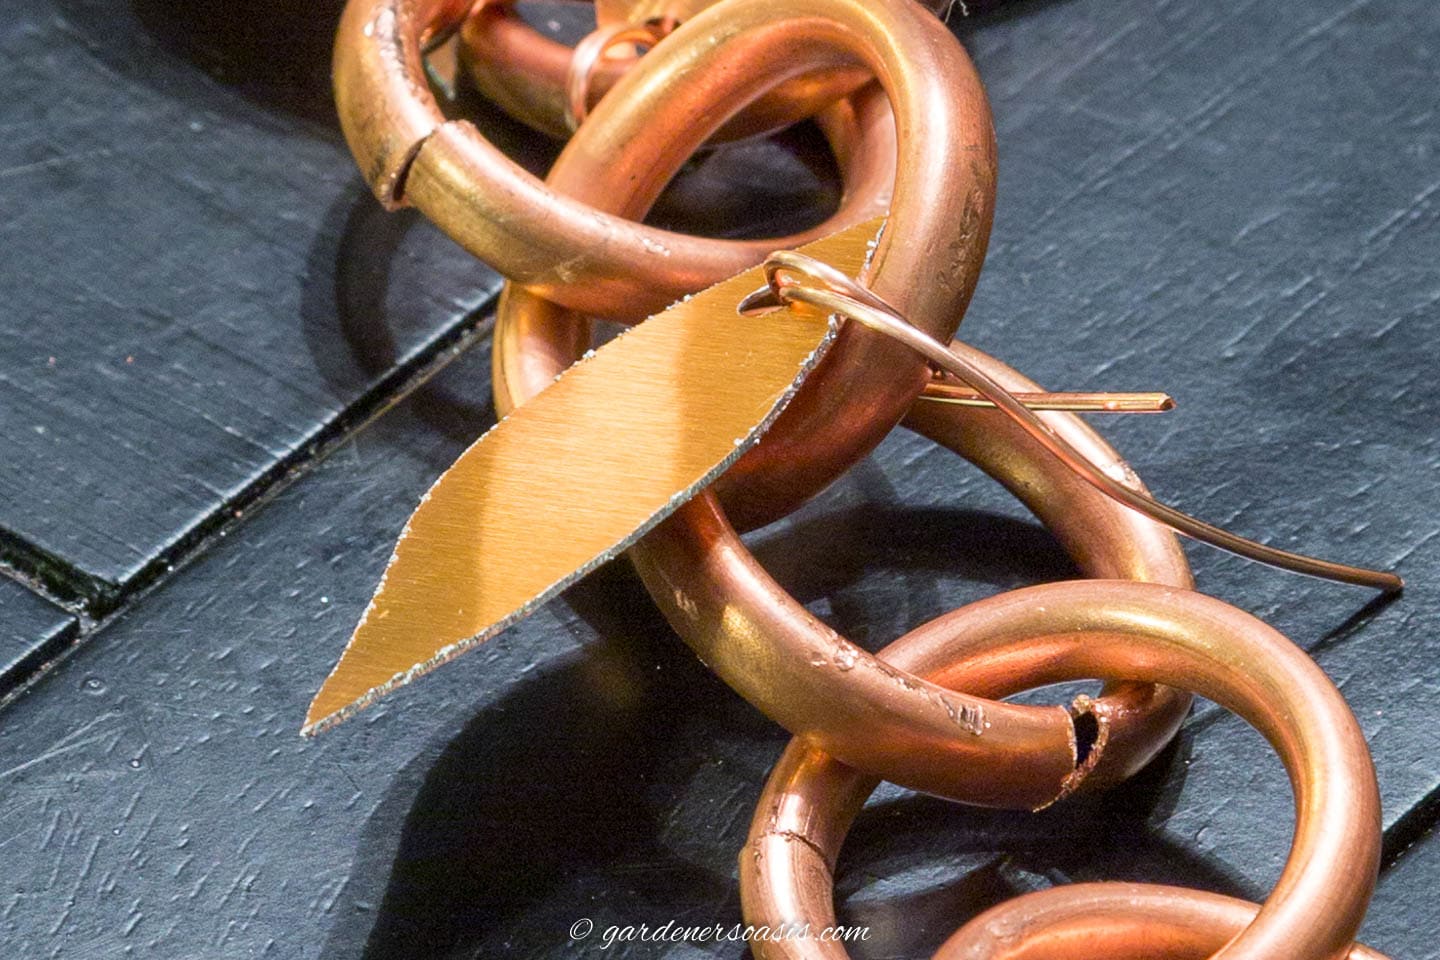 Copper leaf being attached to the DIY copper rain chain with a wire